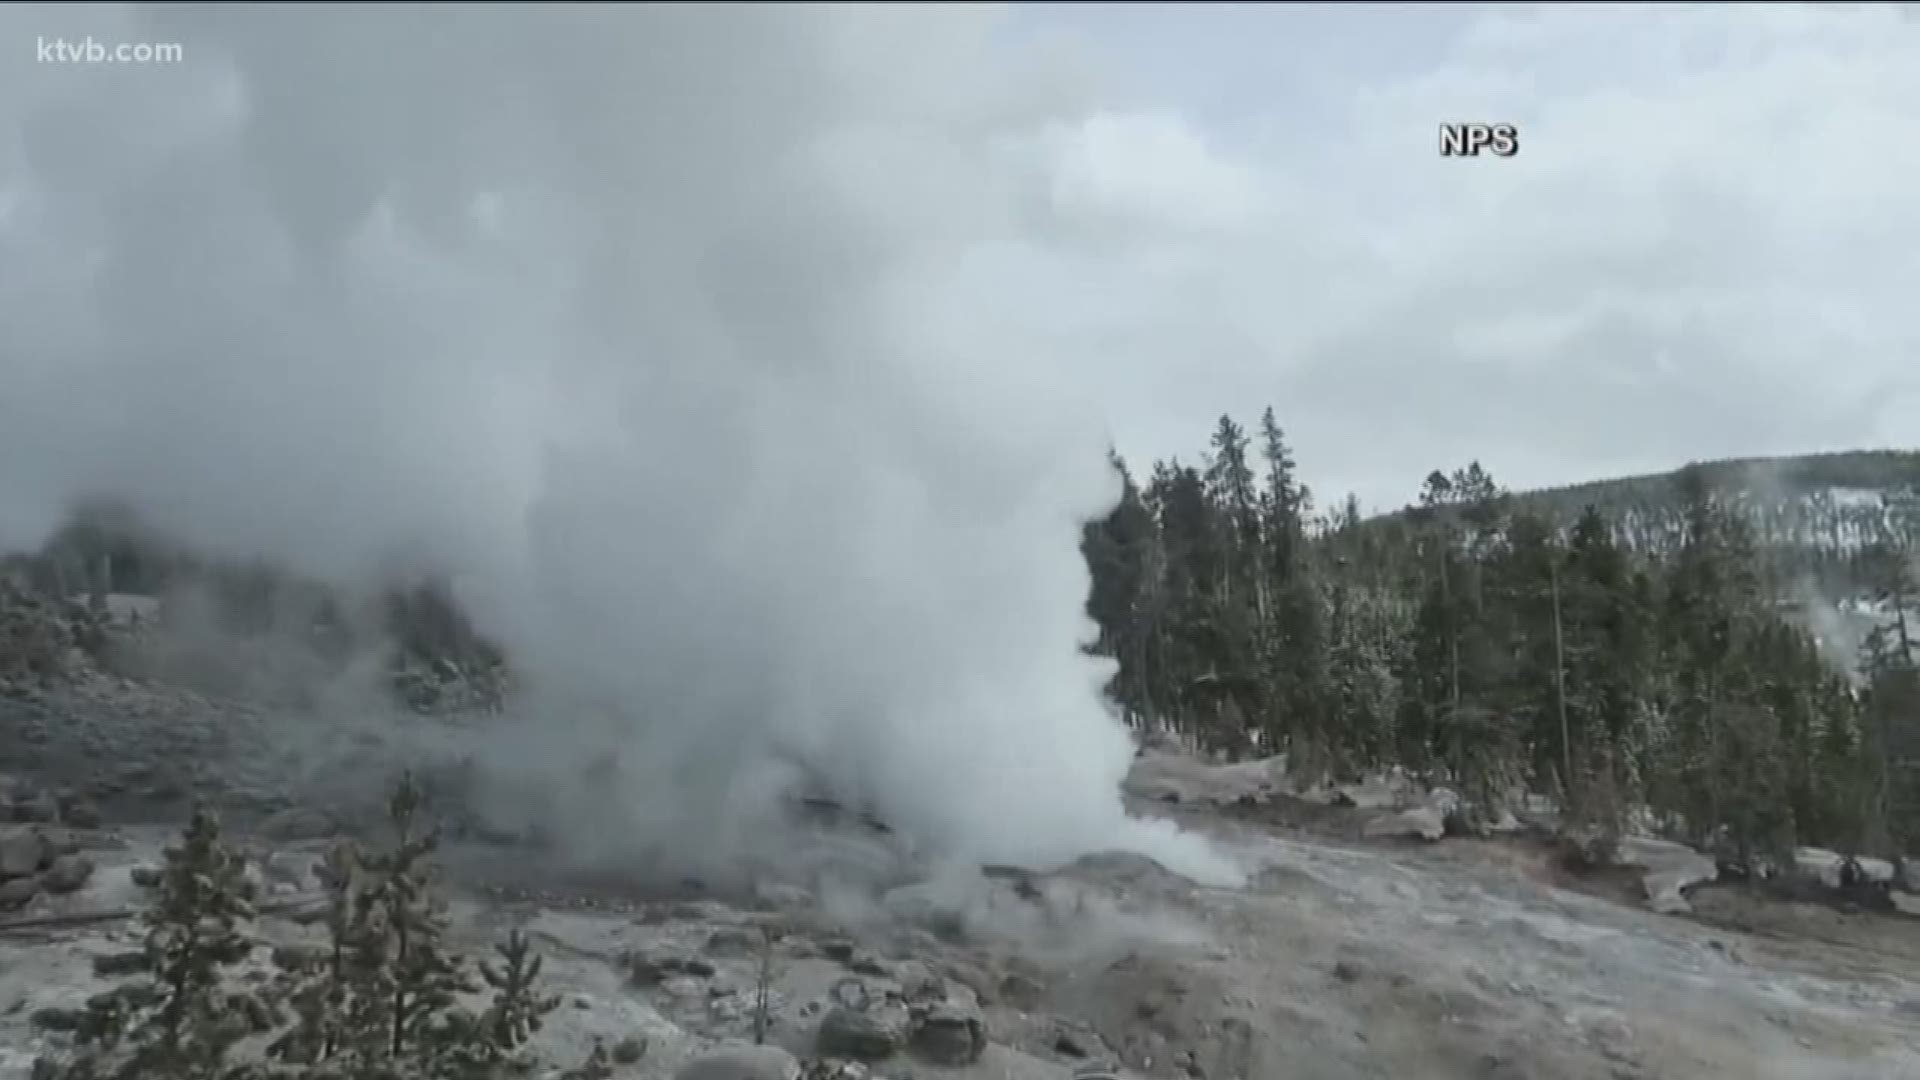 The National Park Service captured the eruption on video.